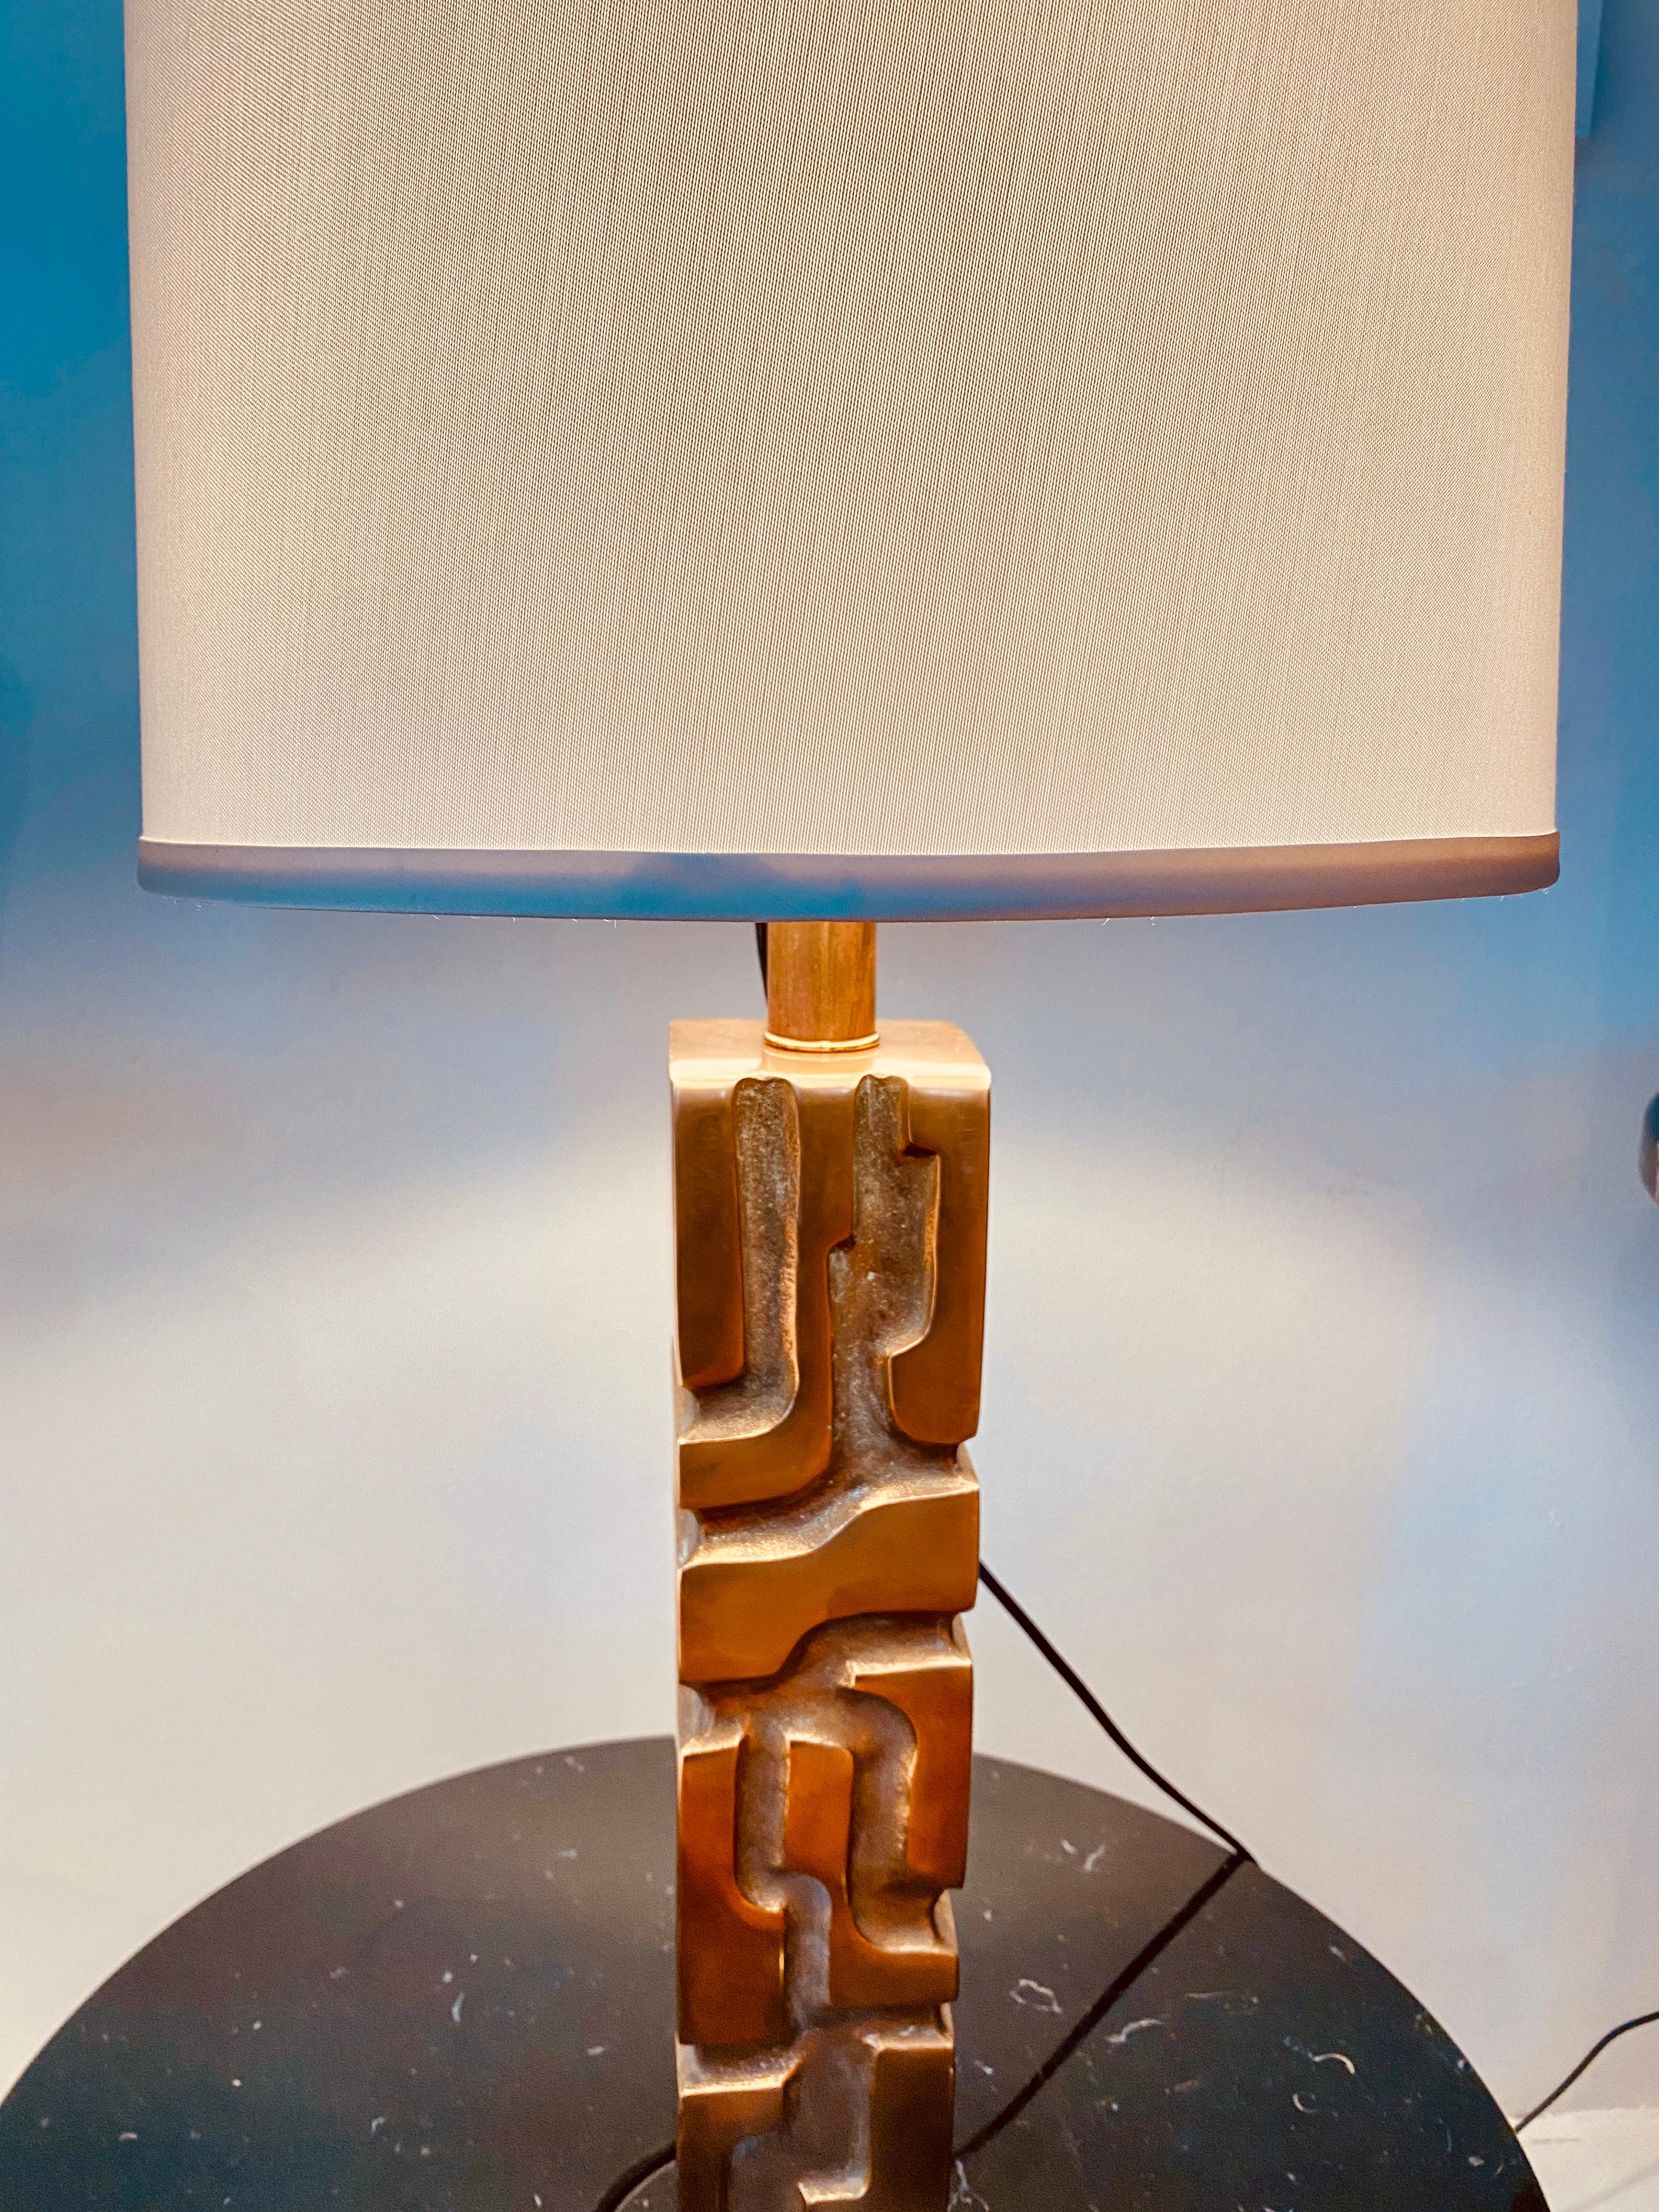 French cast bronze sculptural table lamp, signed M Jaubert, circa 1960-1970
Composed of a cast abstract bronze sculpture on a black marble base, with adjustable shade support rod for varying height shades.
Signed near bottom on bronze.
Signs of